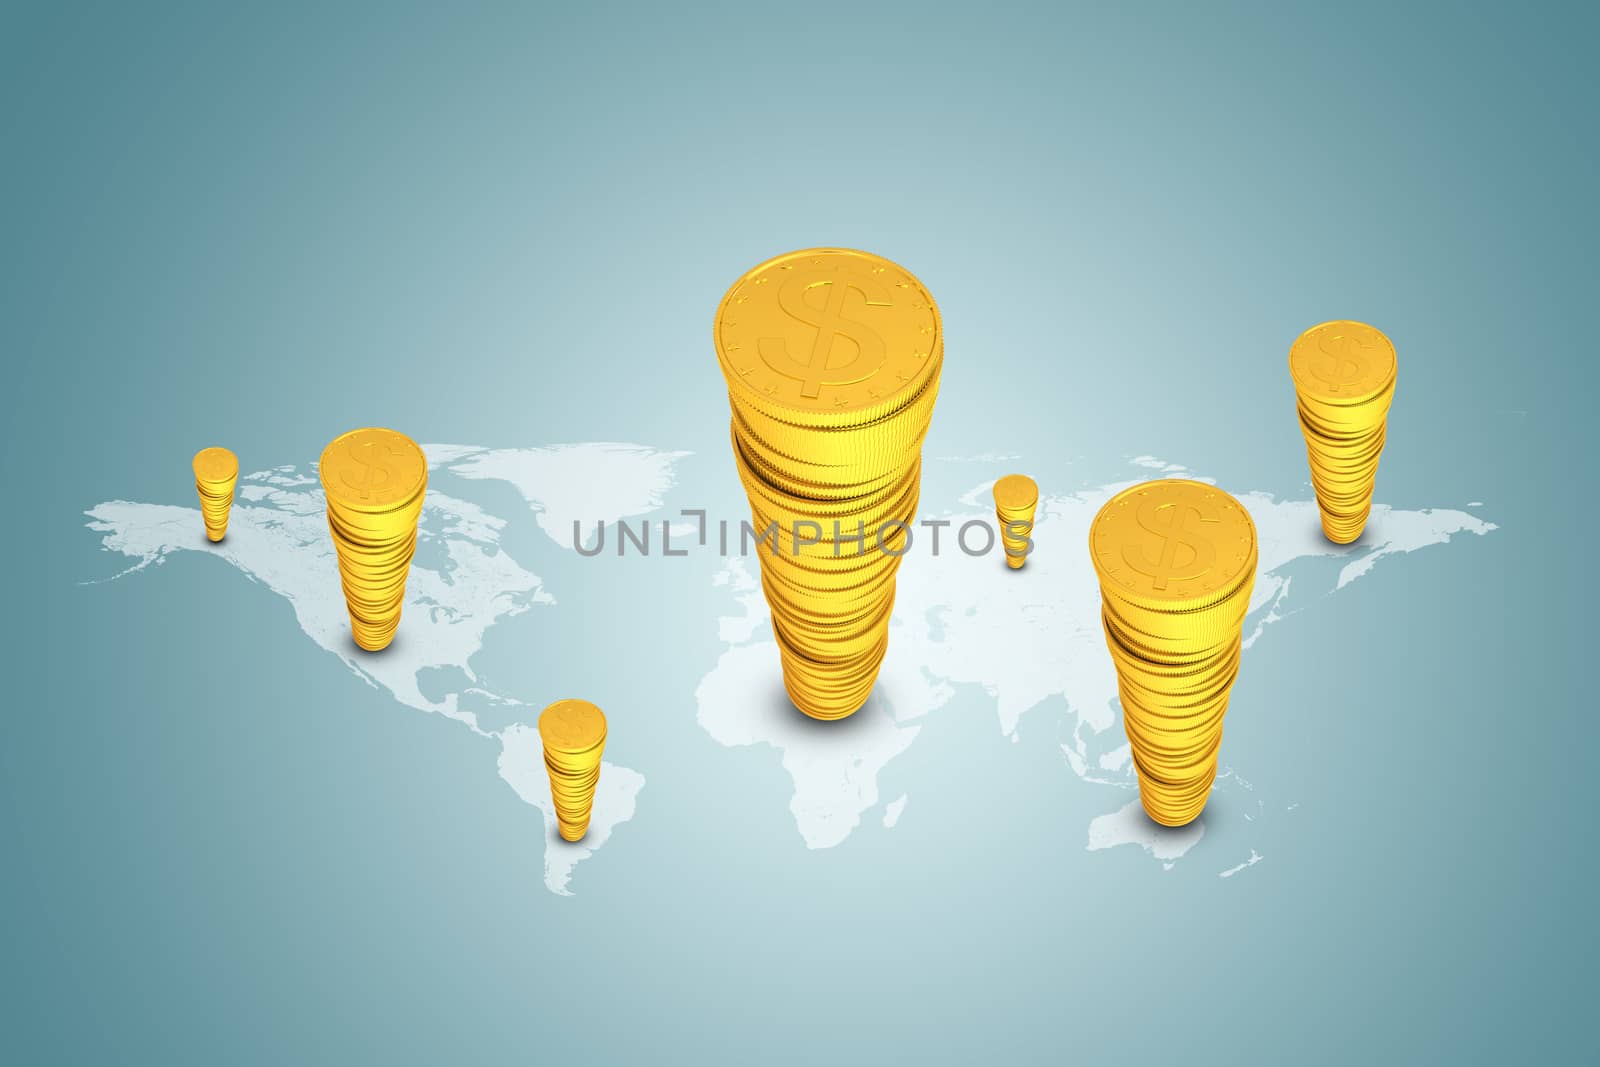 Stacks of gold dollars on world map by cherezoff